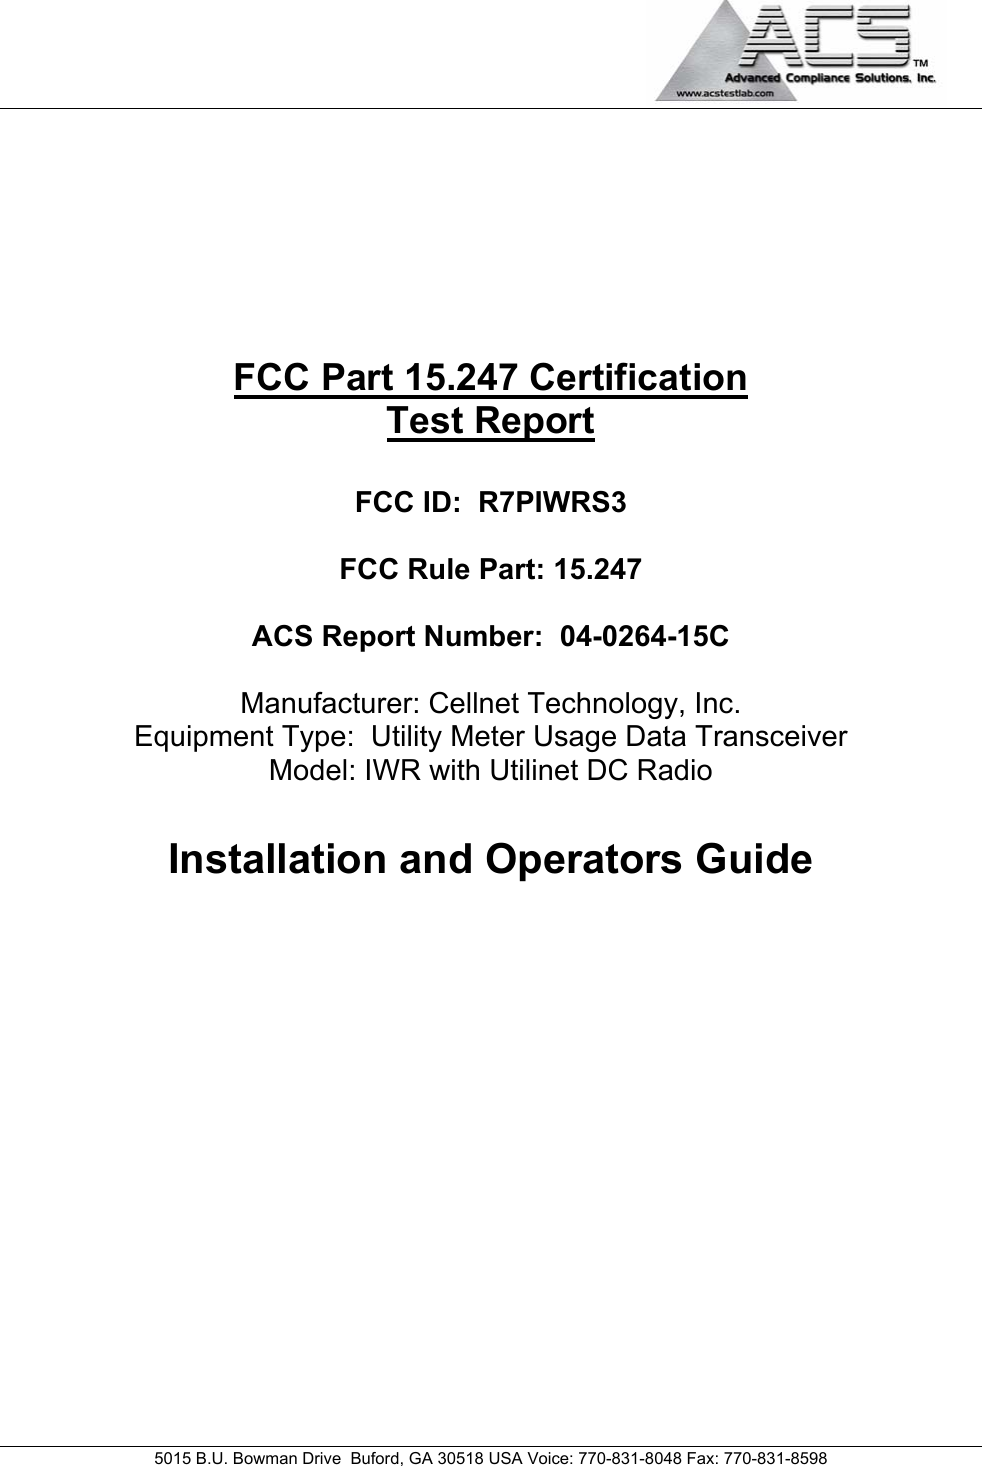                                             5015 B.U. Bowman Drive  Buford, GA 30518 USA Voice: 770-831-8048 Fax: 770-831-8598        FCC Part 15.247 Certification Test Report  FCC ID:  R7PIWRS3  FCC Rule Part: 15.247  ACS Report Number:  04-0264-15C   Manufacturer: Cellnet Technology, Inc.  Equipment Type:  Utility Meter Usage Data Transceiver Model: IWR with Utilinet DC Radio  Installation and Operators Guide            